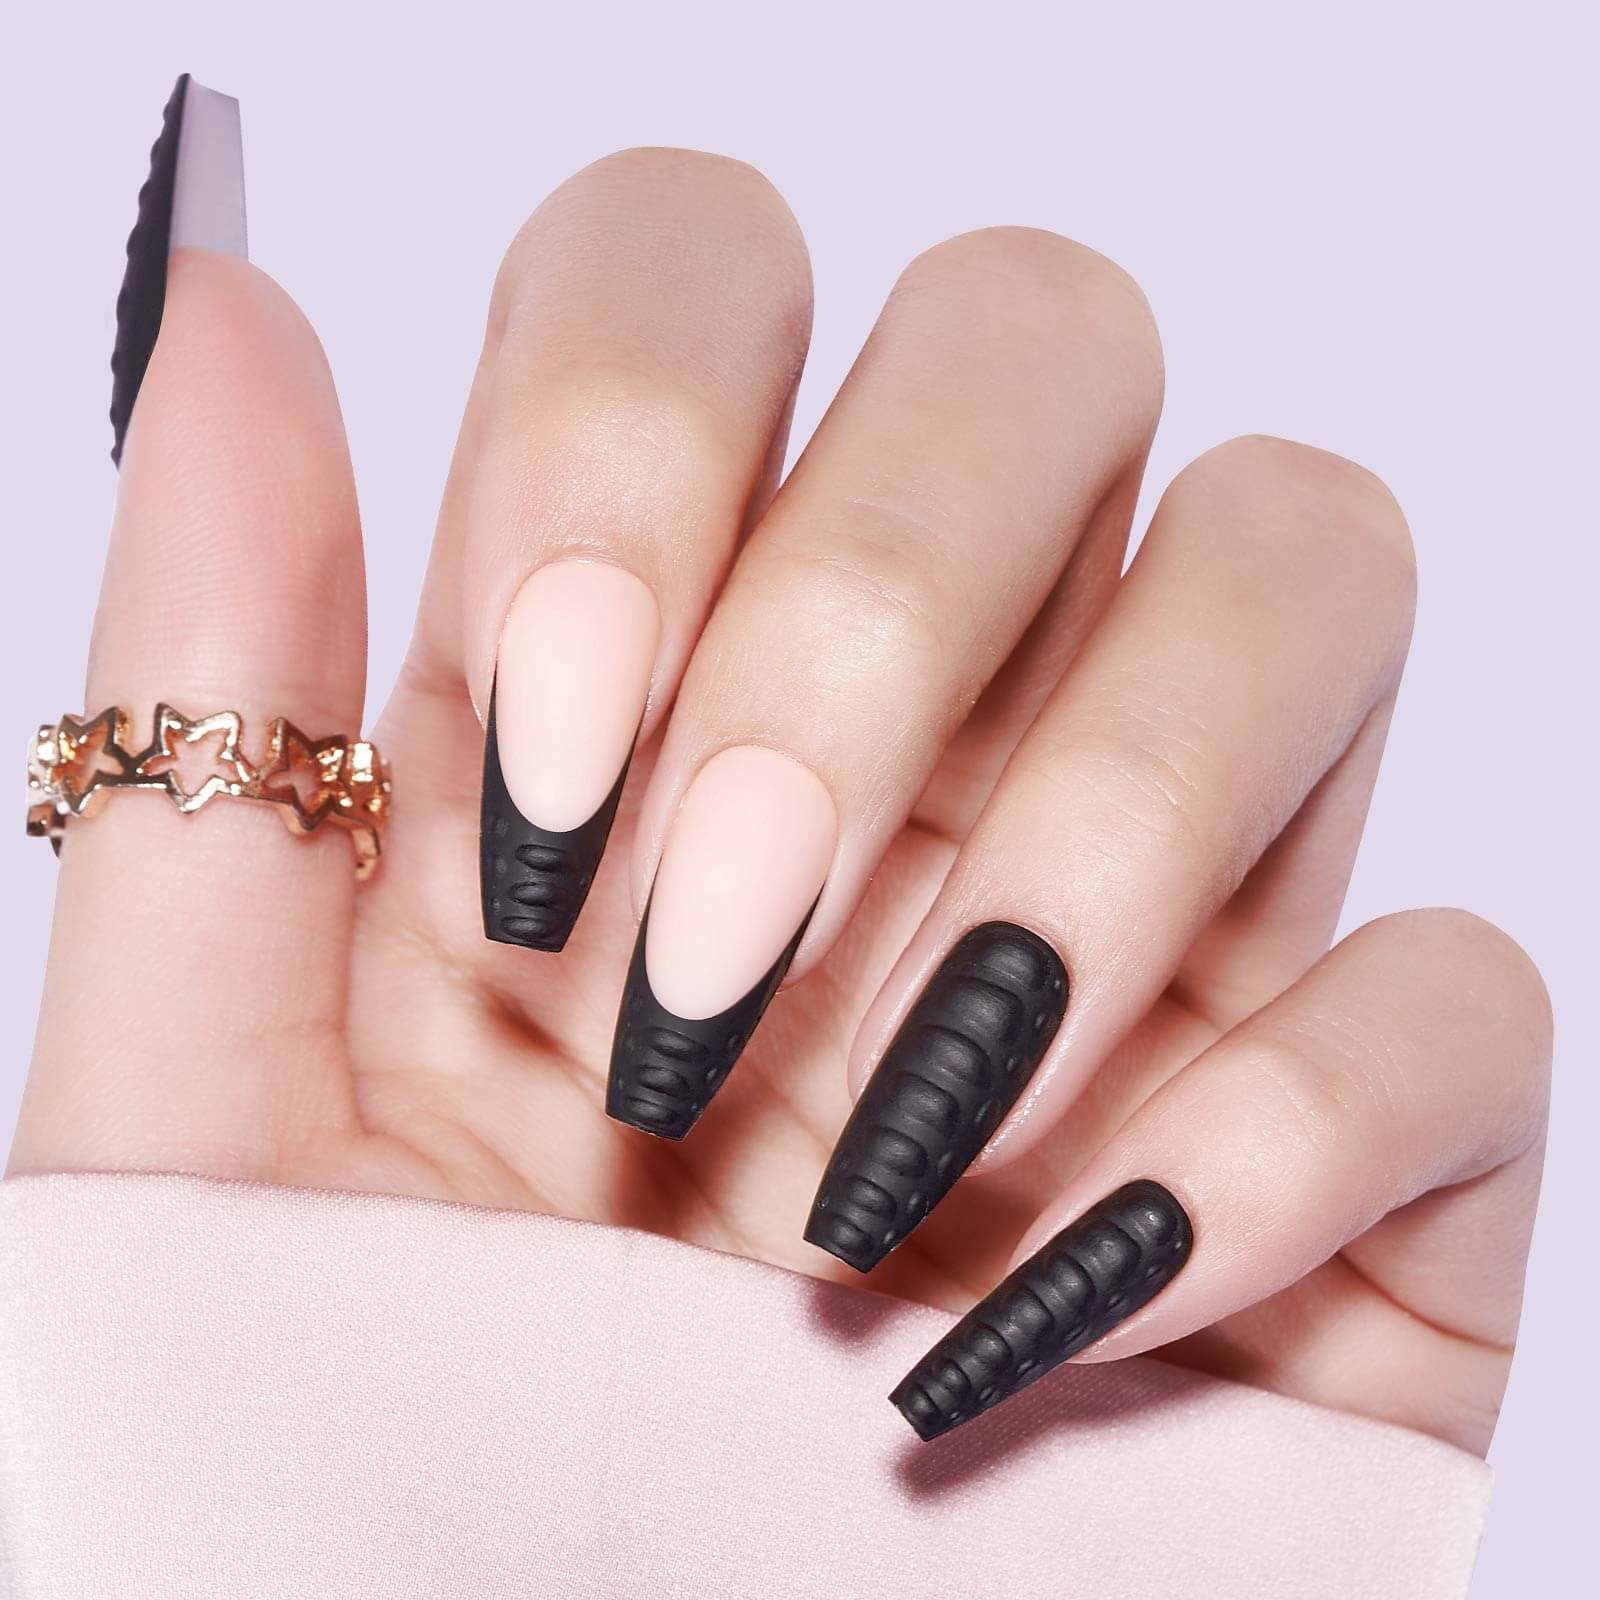 Buy MISUD Stiletto Fake Nails 24 Pcs Matte Surface Black Almond Sharp Shape  Press-on Style Art Artificial Nails Fashion False Nail Tips Online at Low  Prices in India - Amazon.in